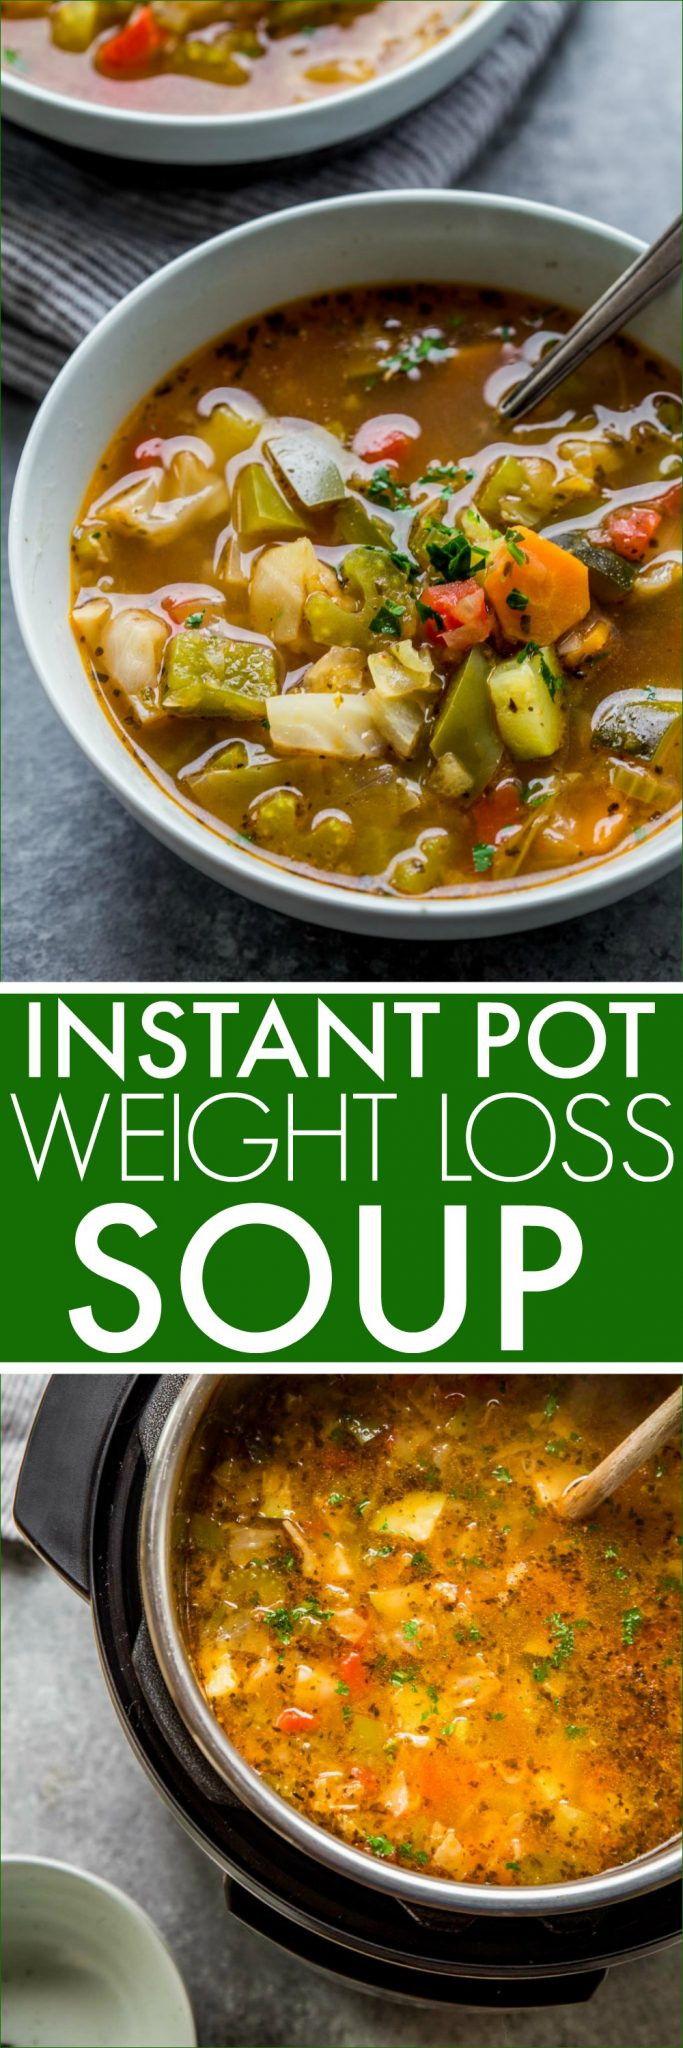 Instant Pot Diet Recipes
 Instant Pot Weight Loss Soup with Stovetop Instructions